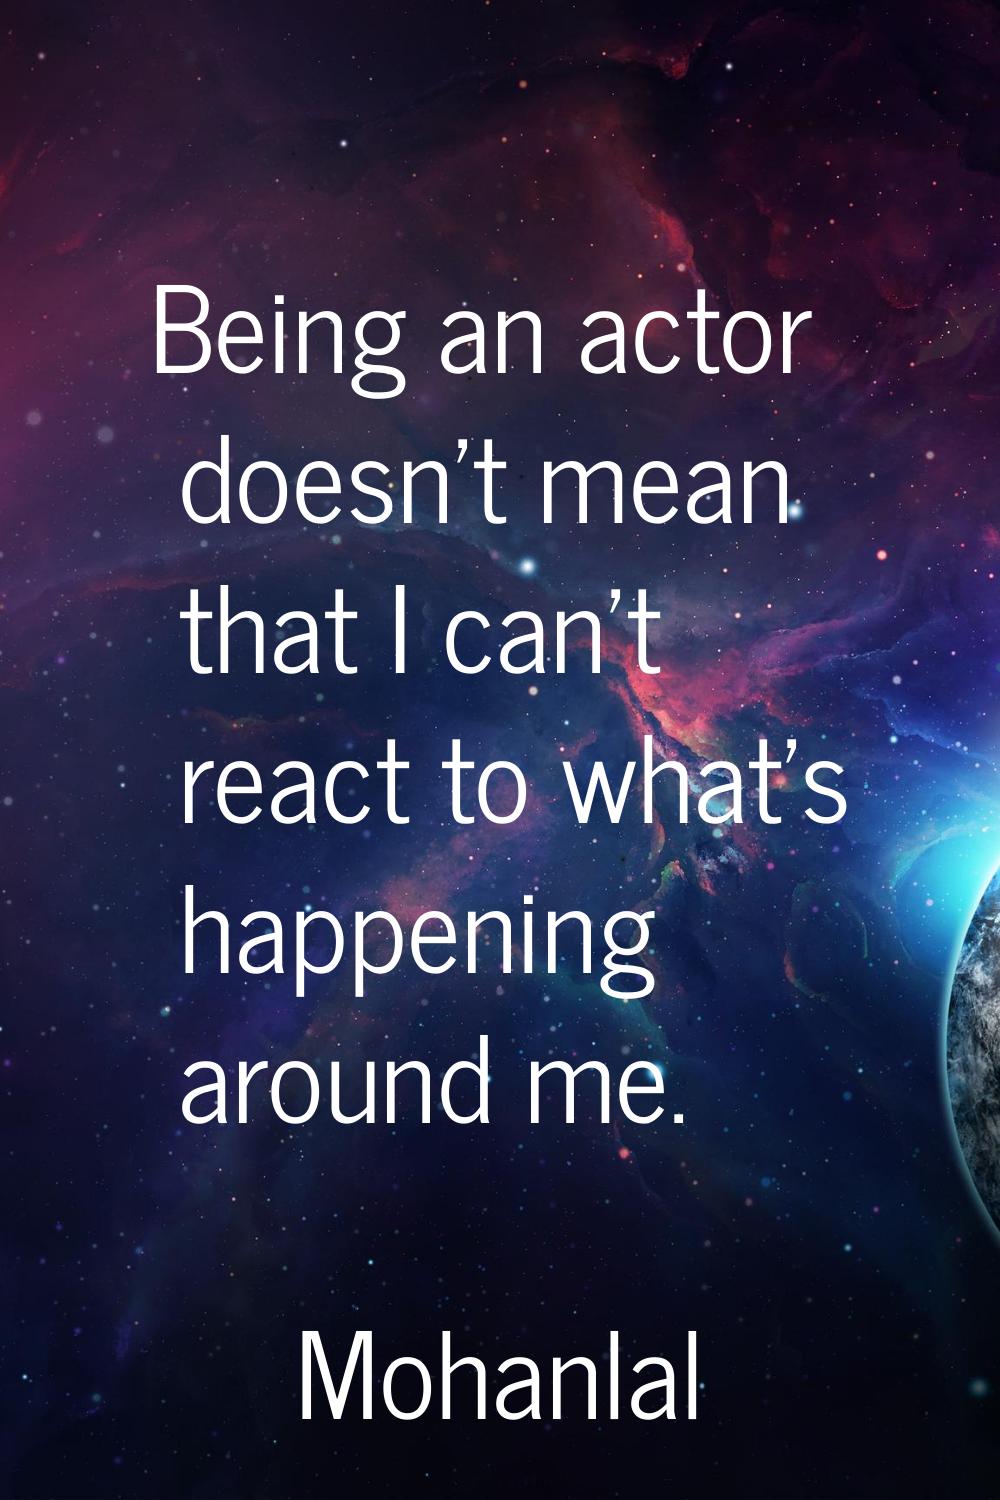 Being an actor doesn't mean that I can't react to what's happening around me.